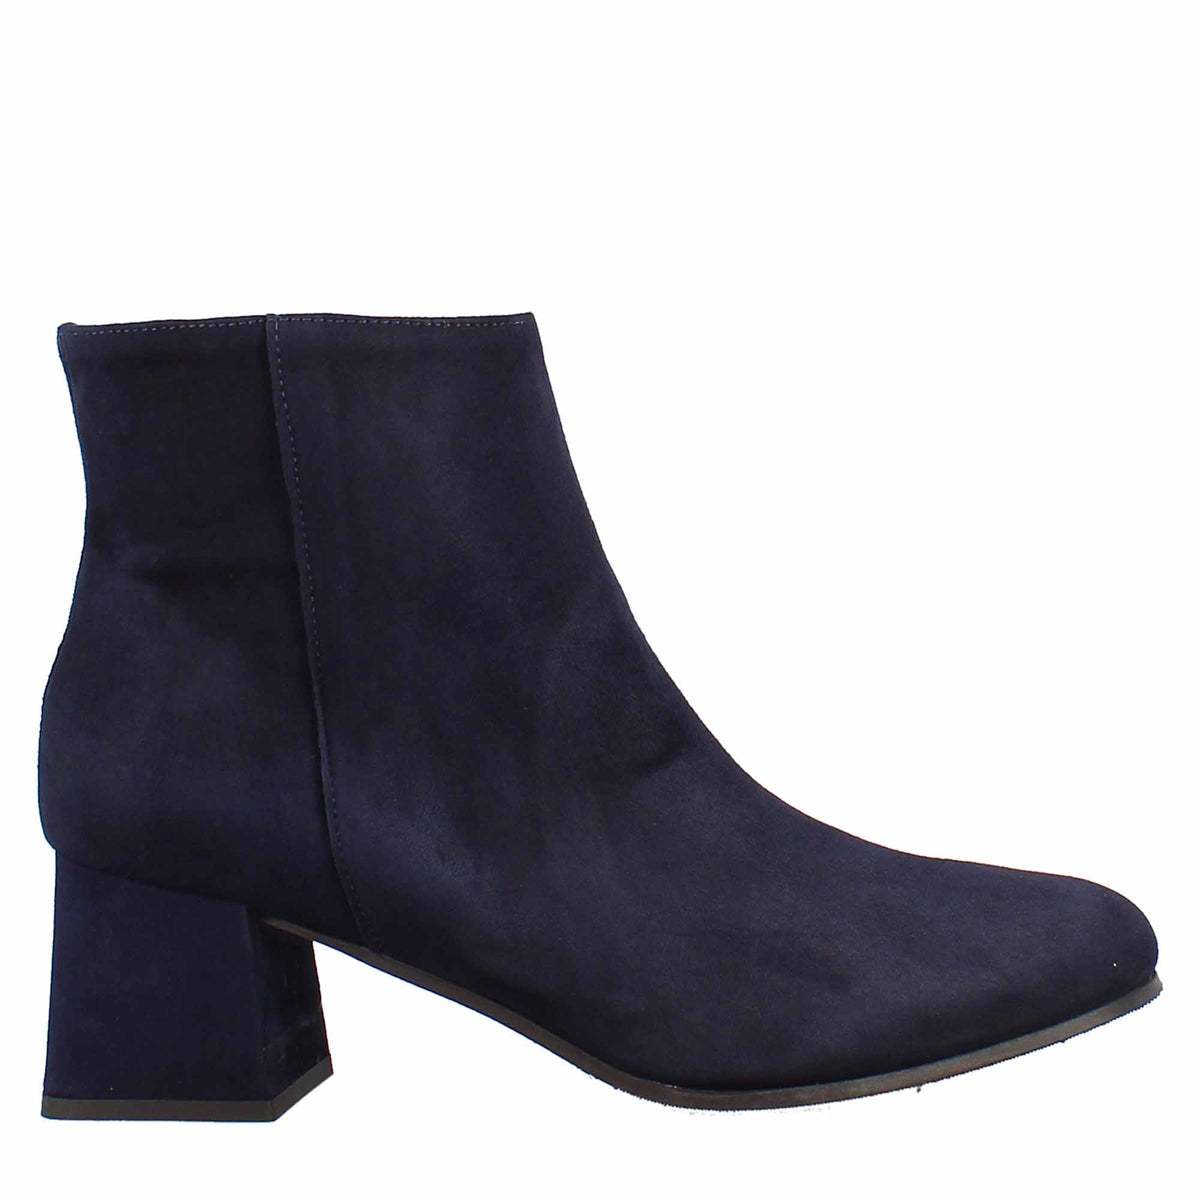 Handmade women's ankle boots in blue suede